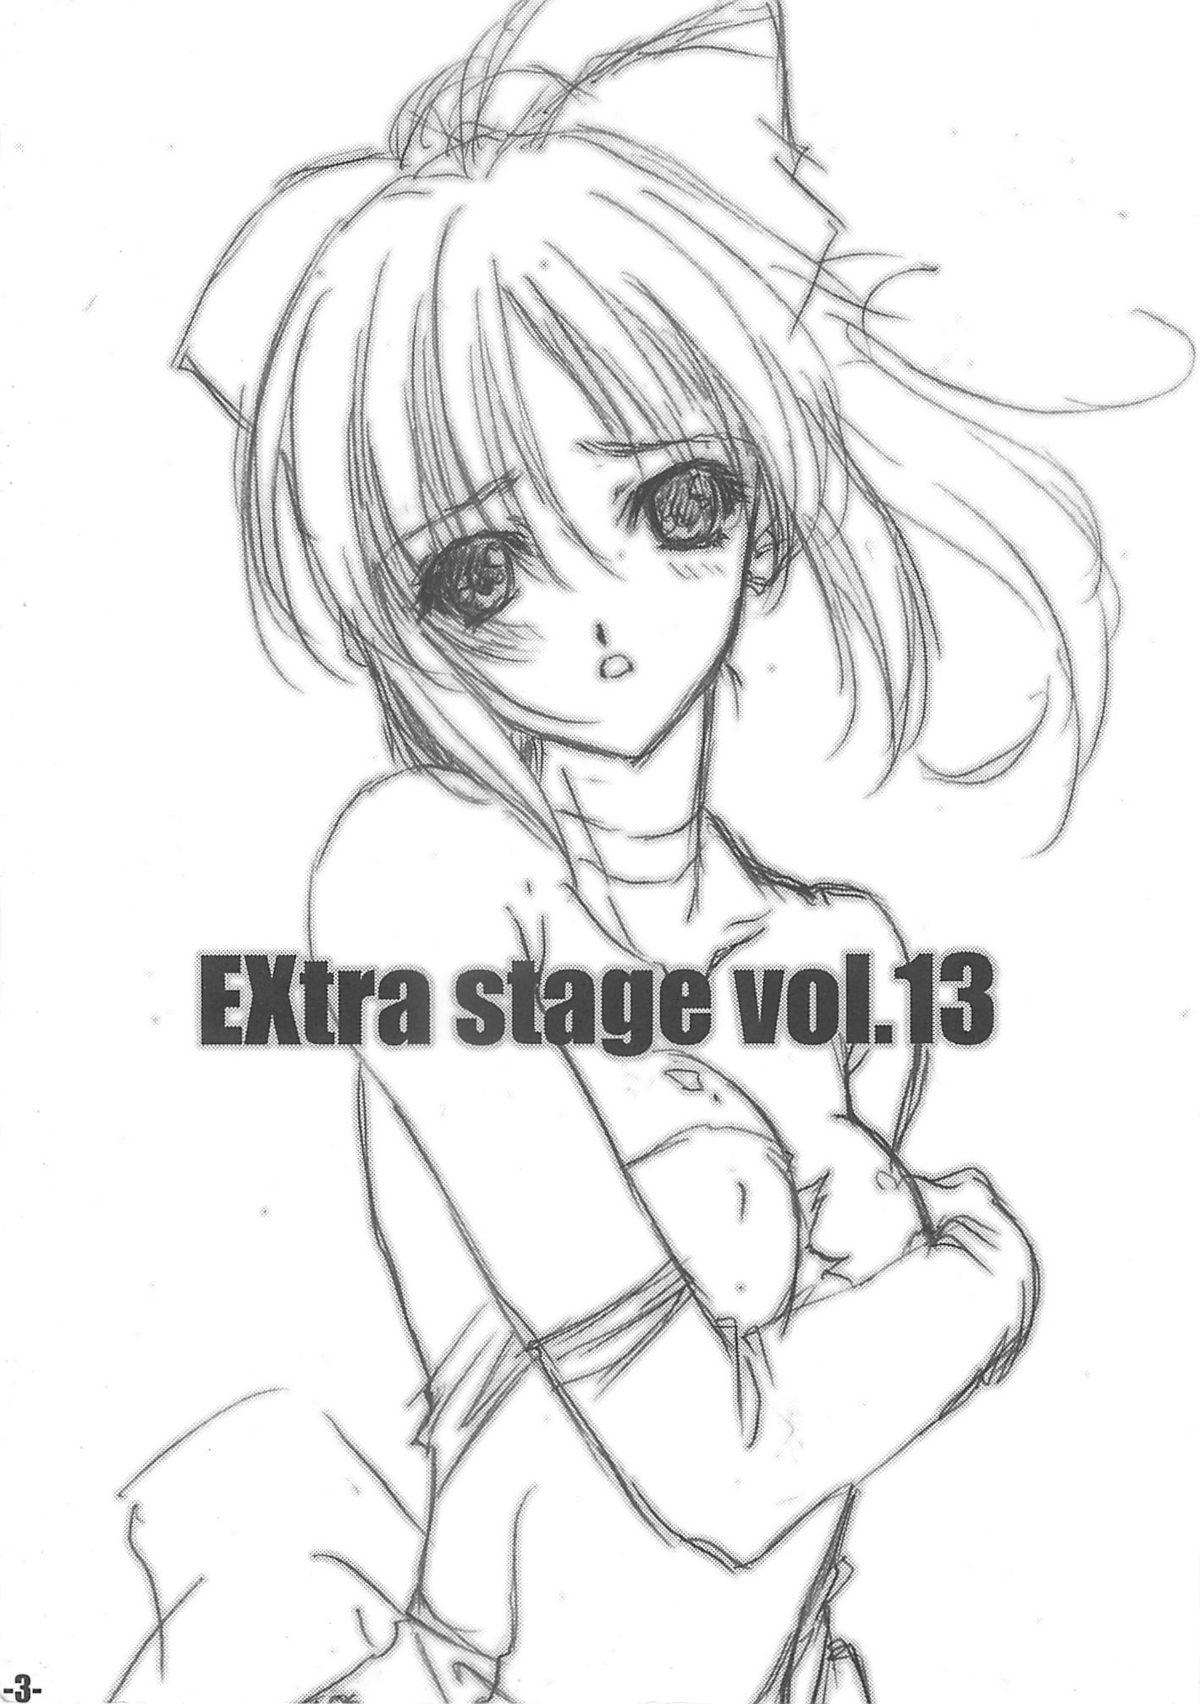 EXtra stage vol. 13 1